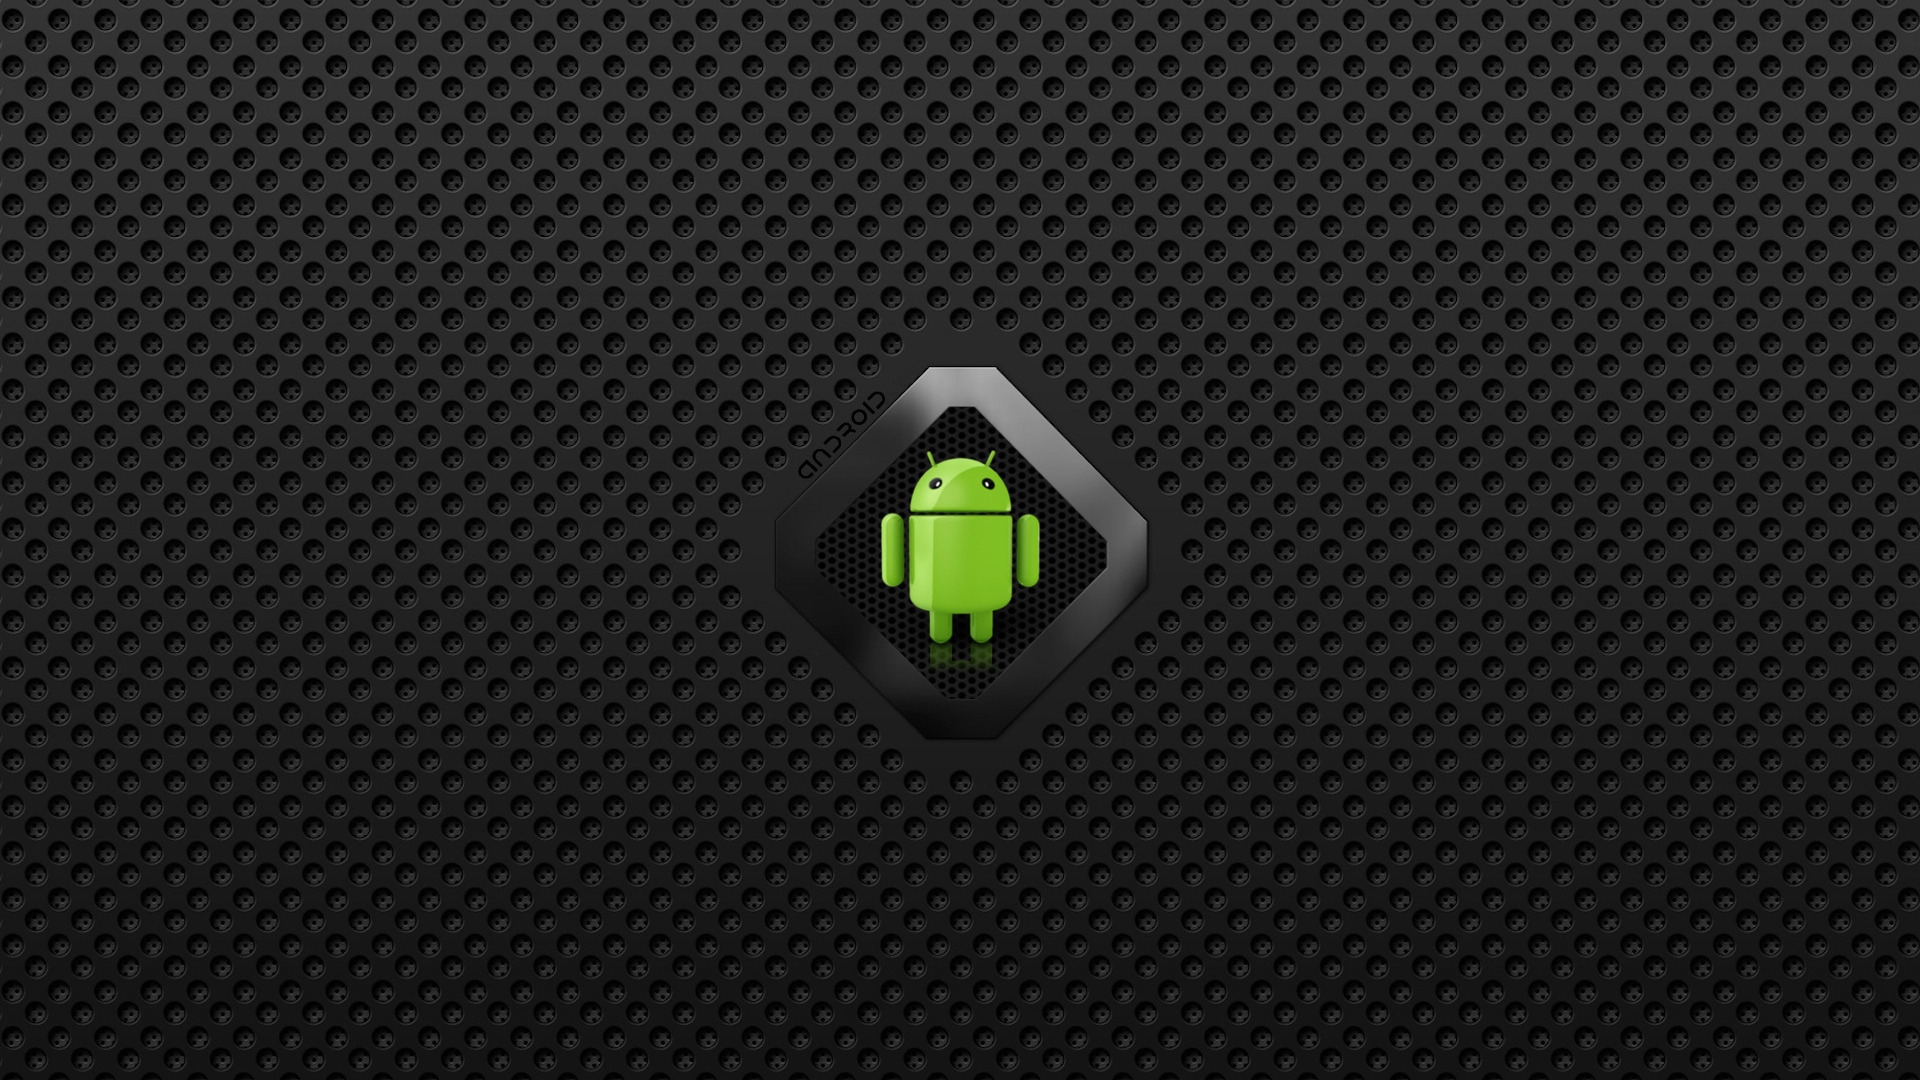 Wallpaper Android Hd 1080p